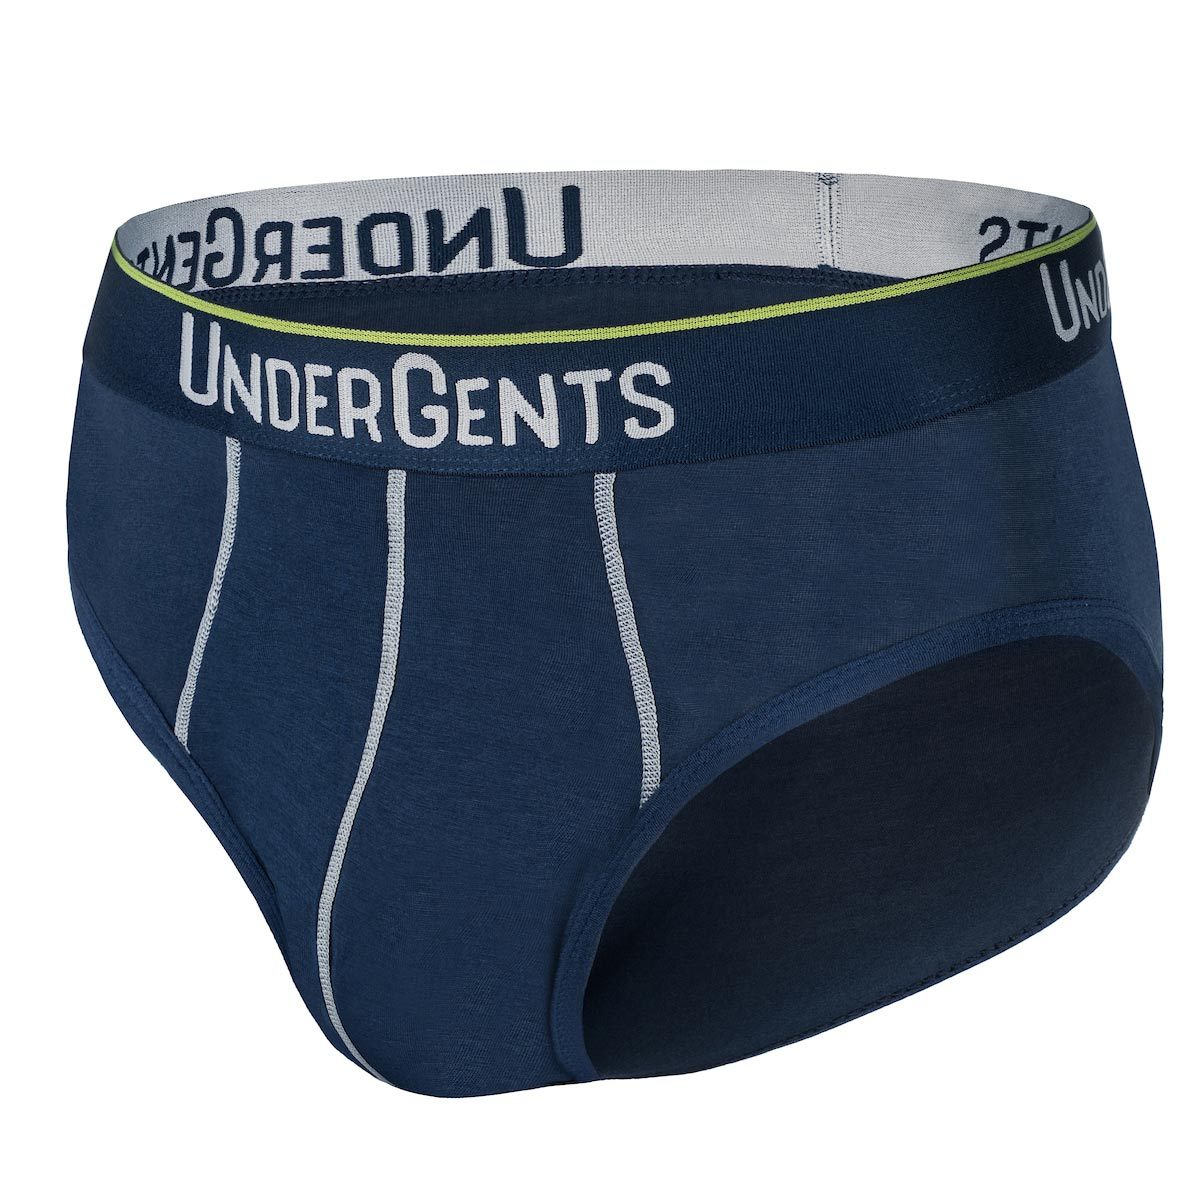 Why Don't We Give Undies as Gifts? Should we? – Underwear News Briefs